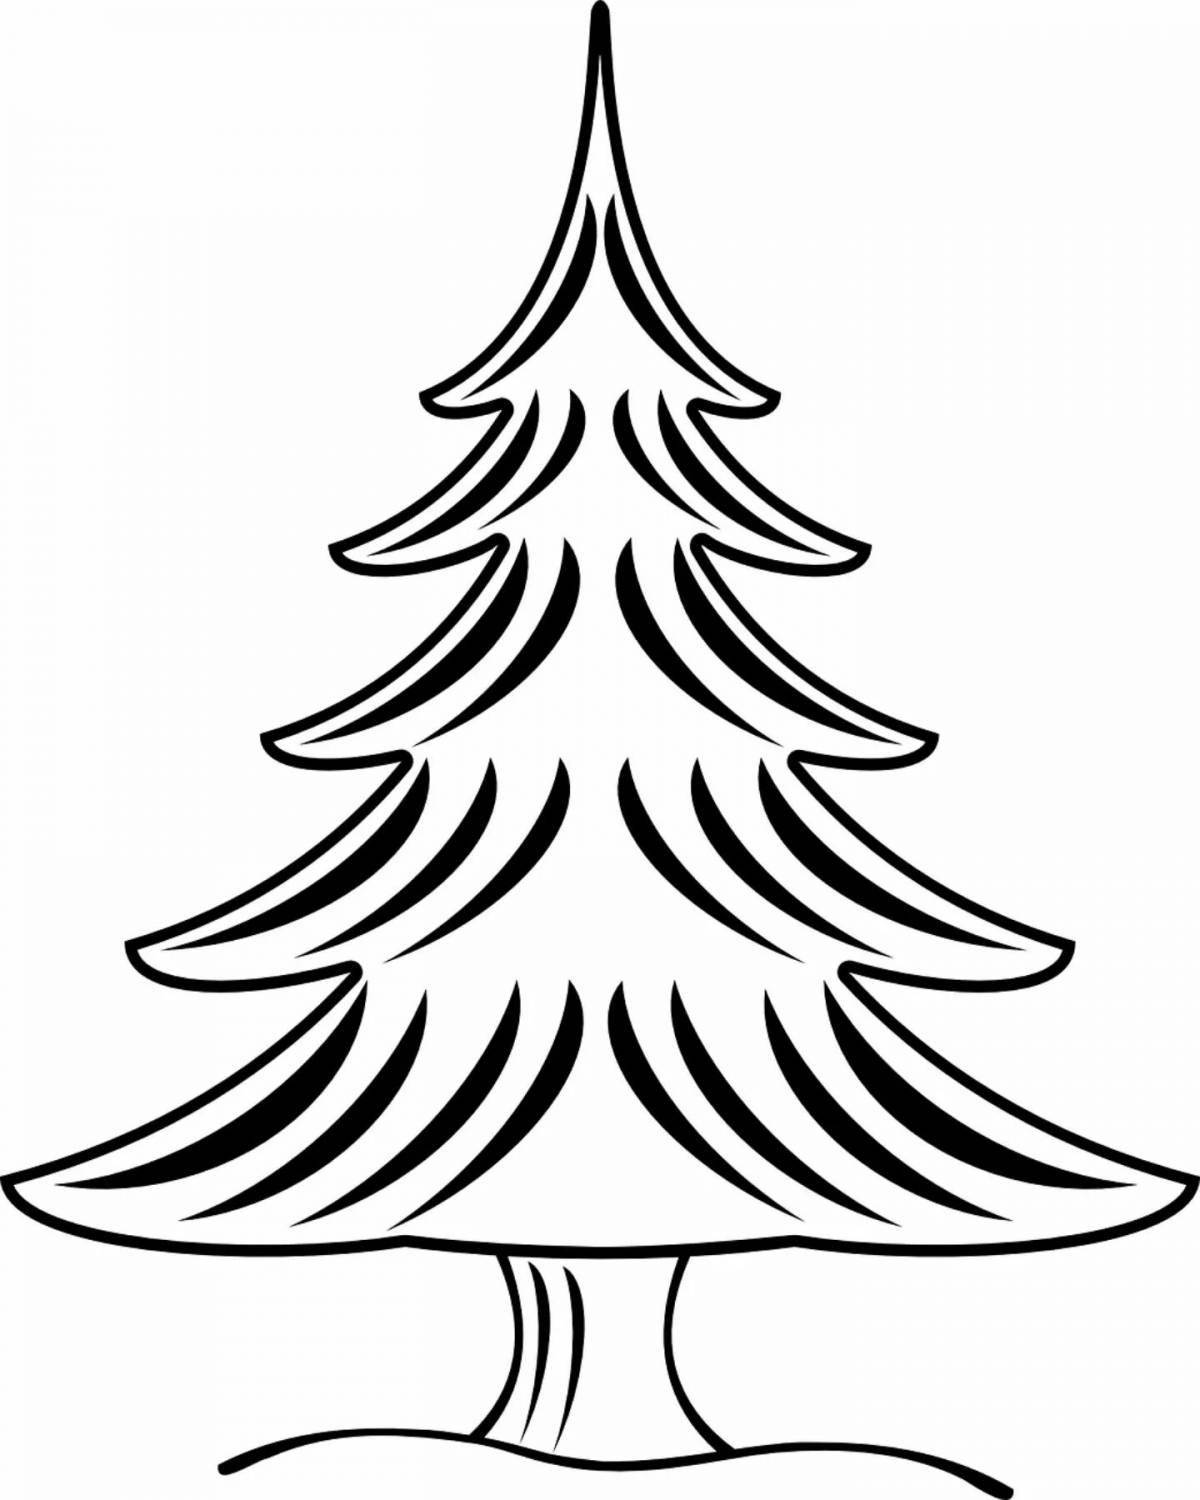 Exciting tree coloring page